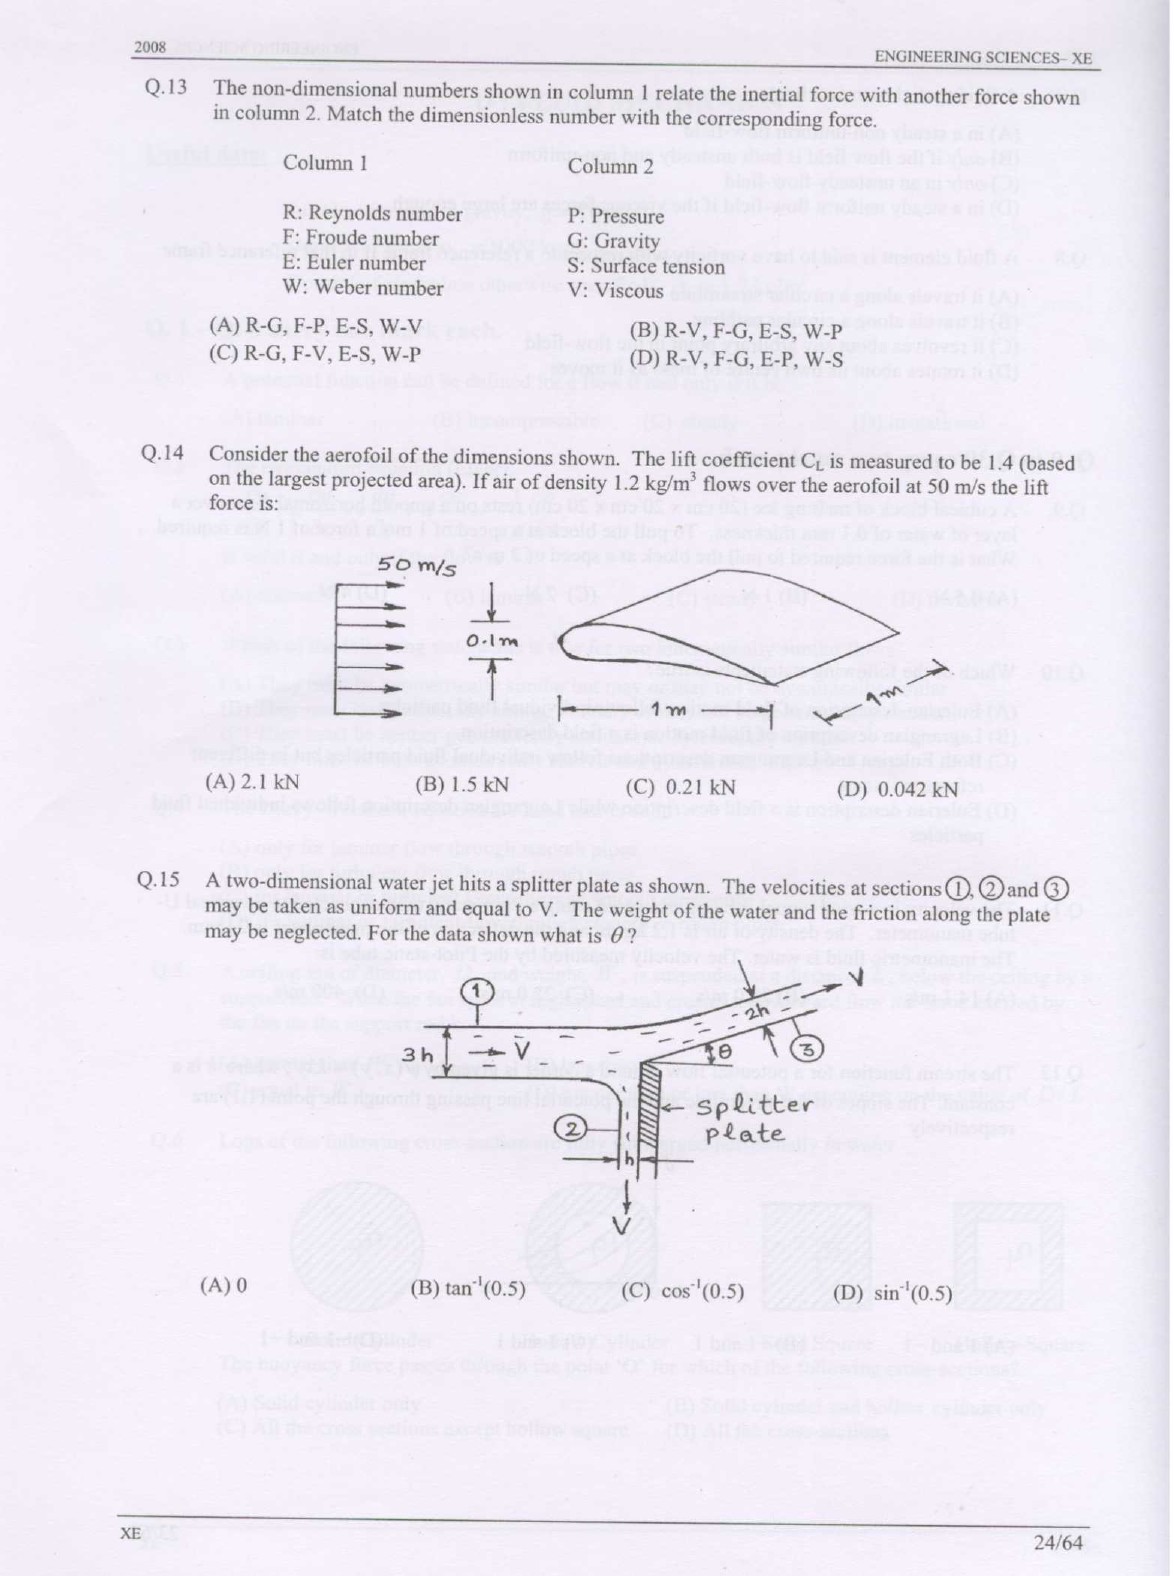 GATE Exam Question Paper 2008 Engineering Sciences 24